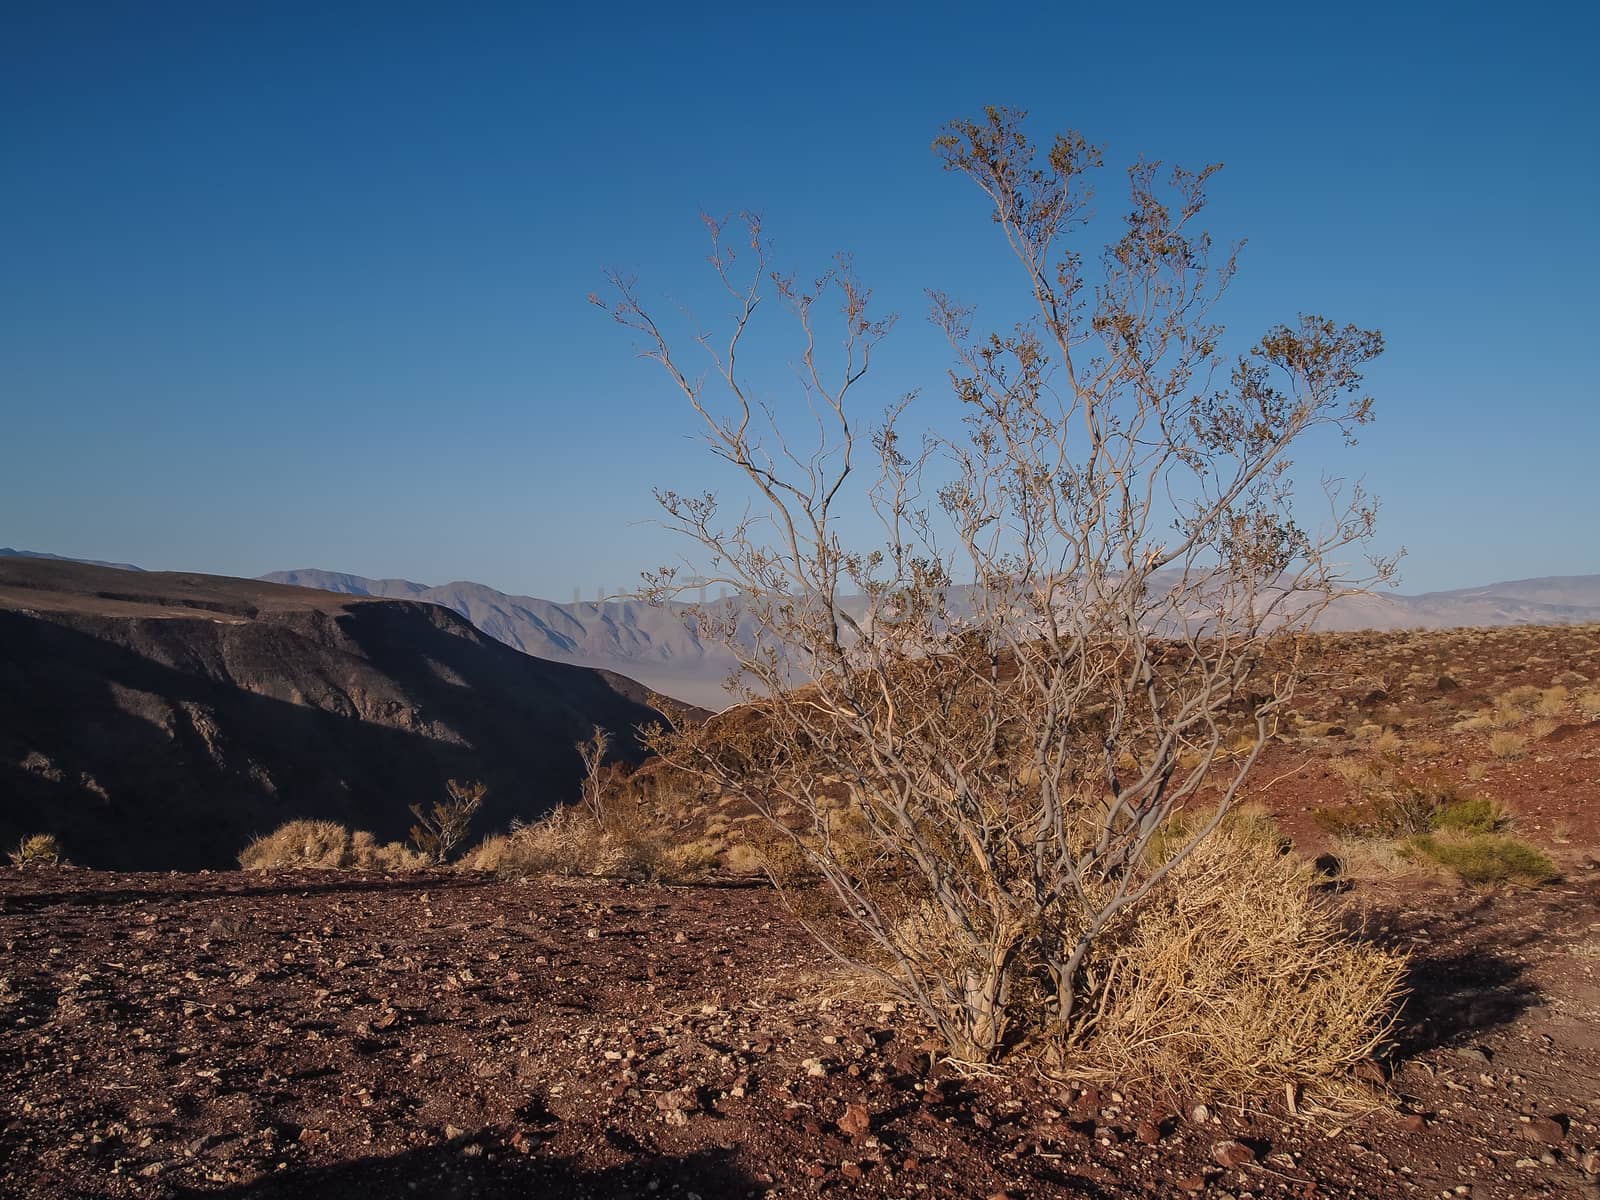 Mountains, dry tree and desert landscape by simpleBE